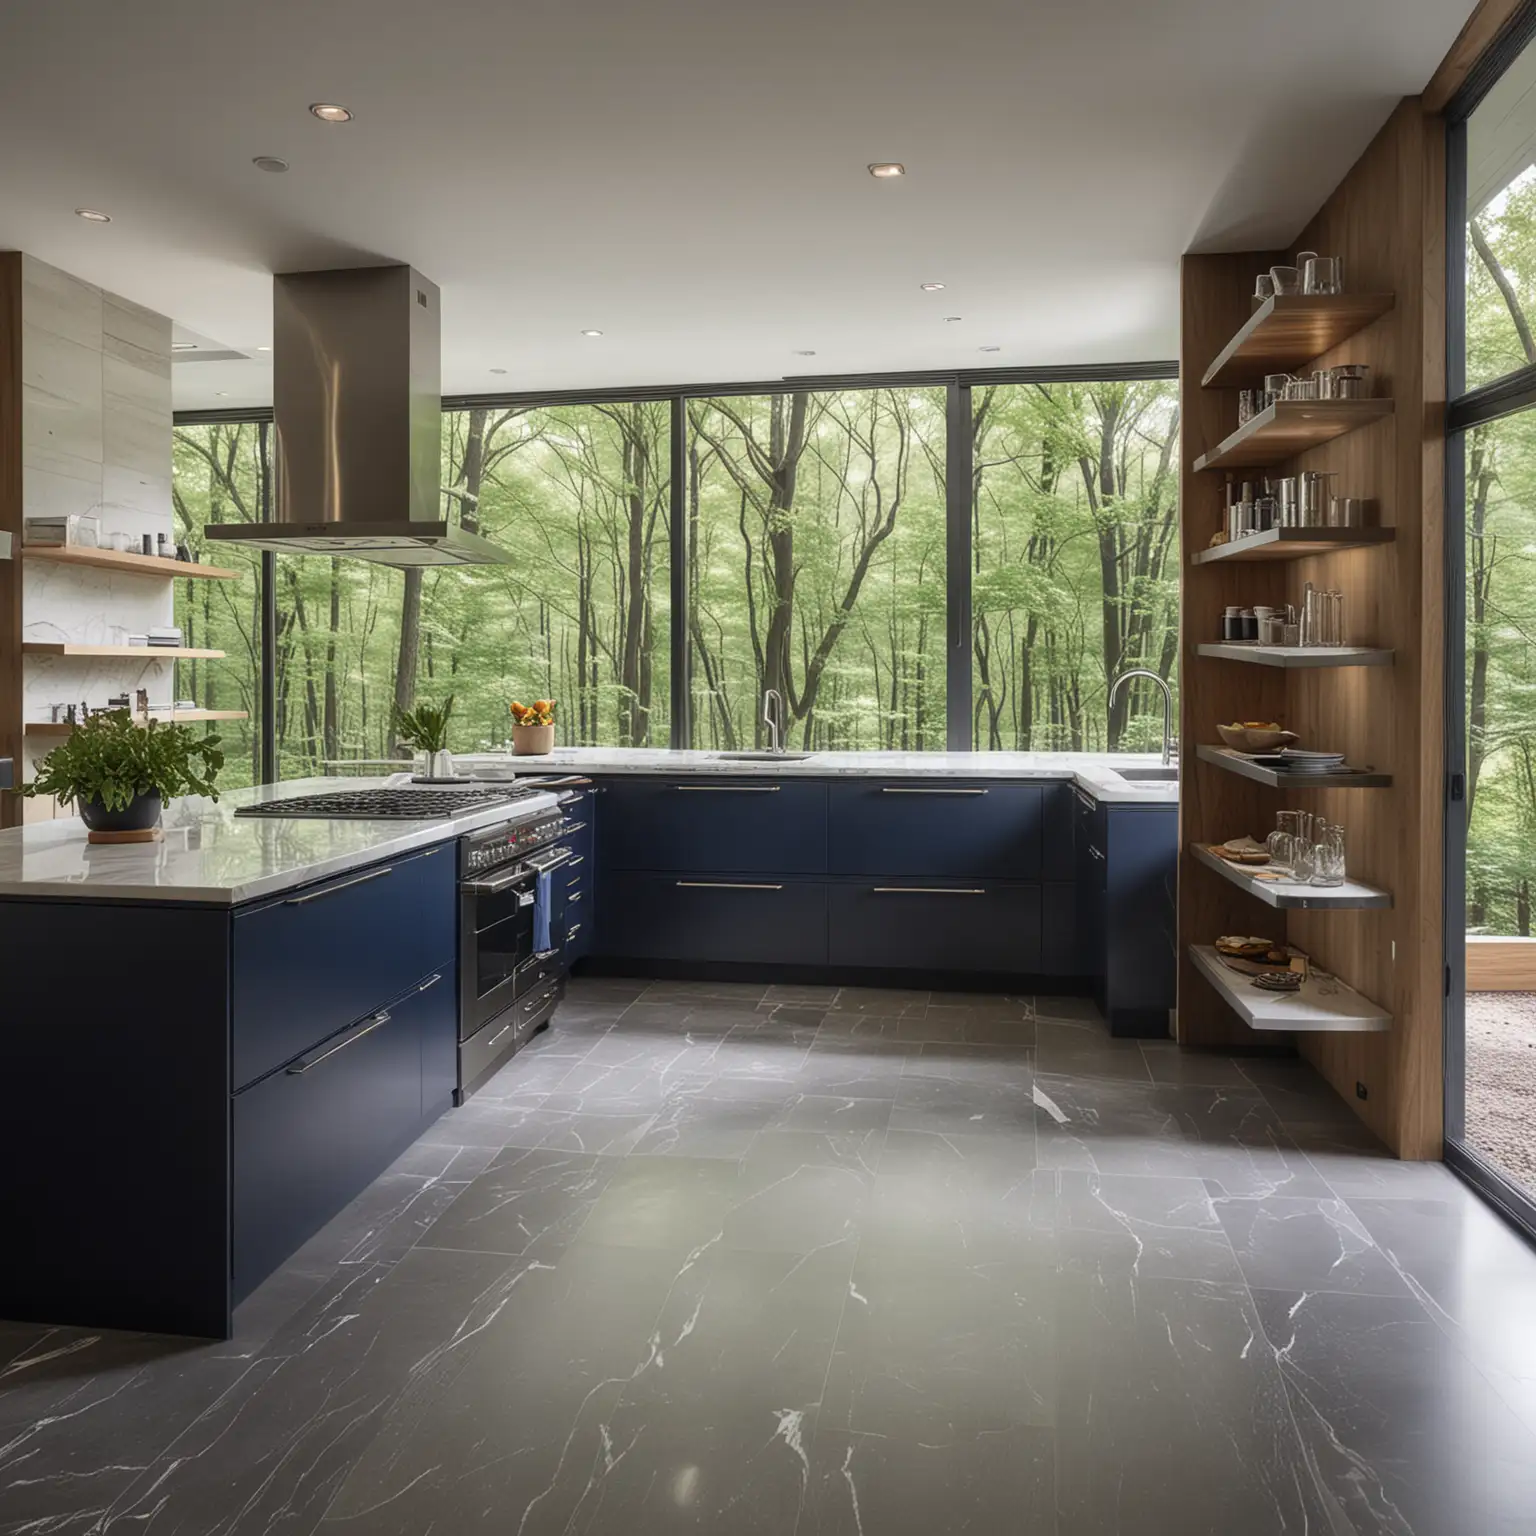 a wide distance shot of a modern kitchen Surrounded by towering trees and tranquil forest views, this kitchen showcases glossy navy blue, handle-less cabinetry and white marble countertops. Built-in stainless steel appliances seamlessly blend into the luxurious design, while open wooden shelving adds a natural element. The dark color palette with bright white contrasts reflects the serene woodland surroundings, illuminated by pendant lights and under-cabinet LED lighting that enhance the kitchen's elegance.